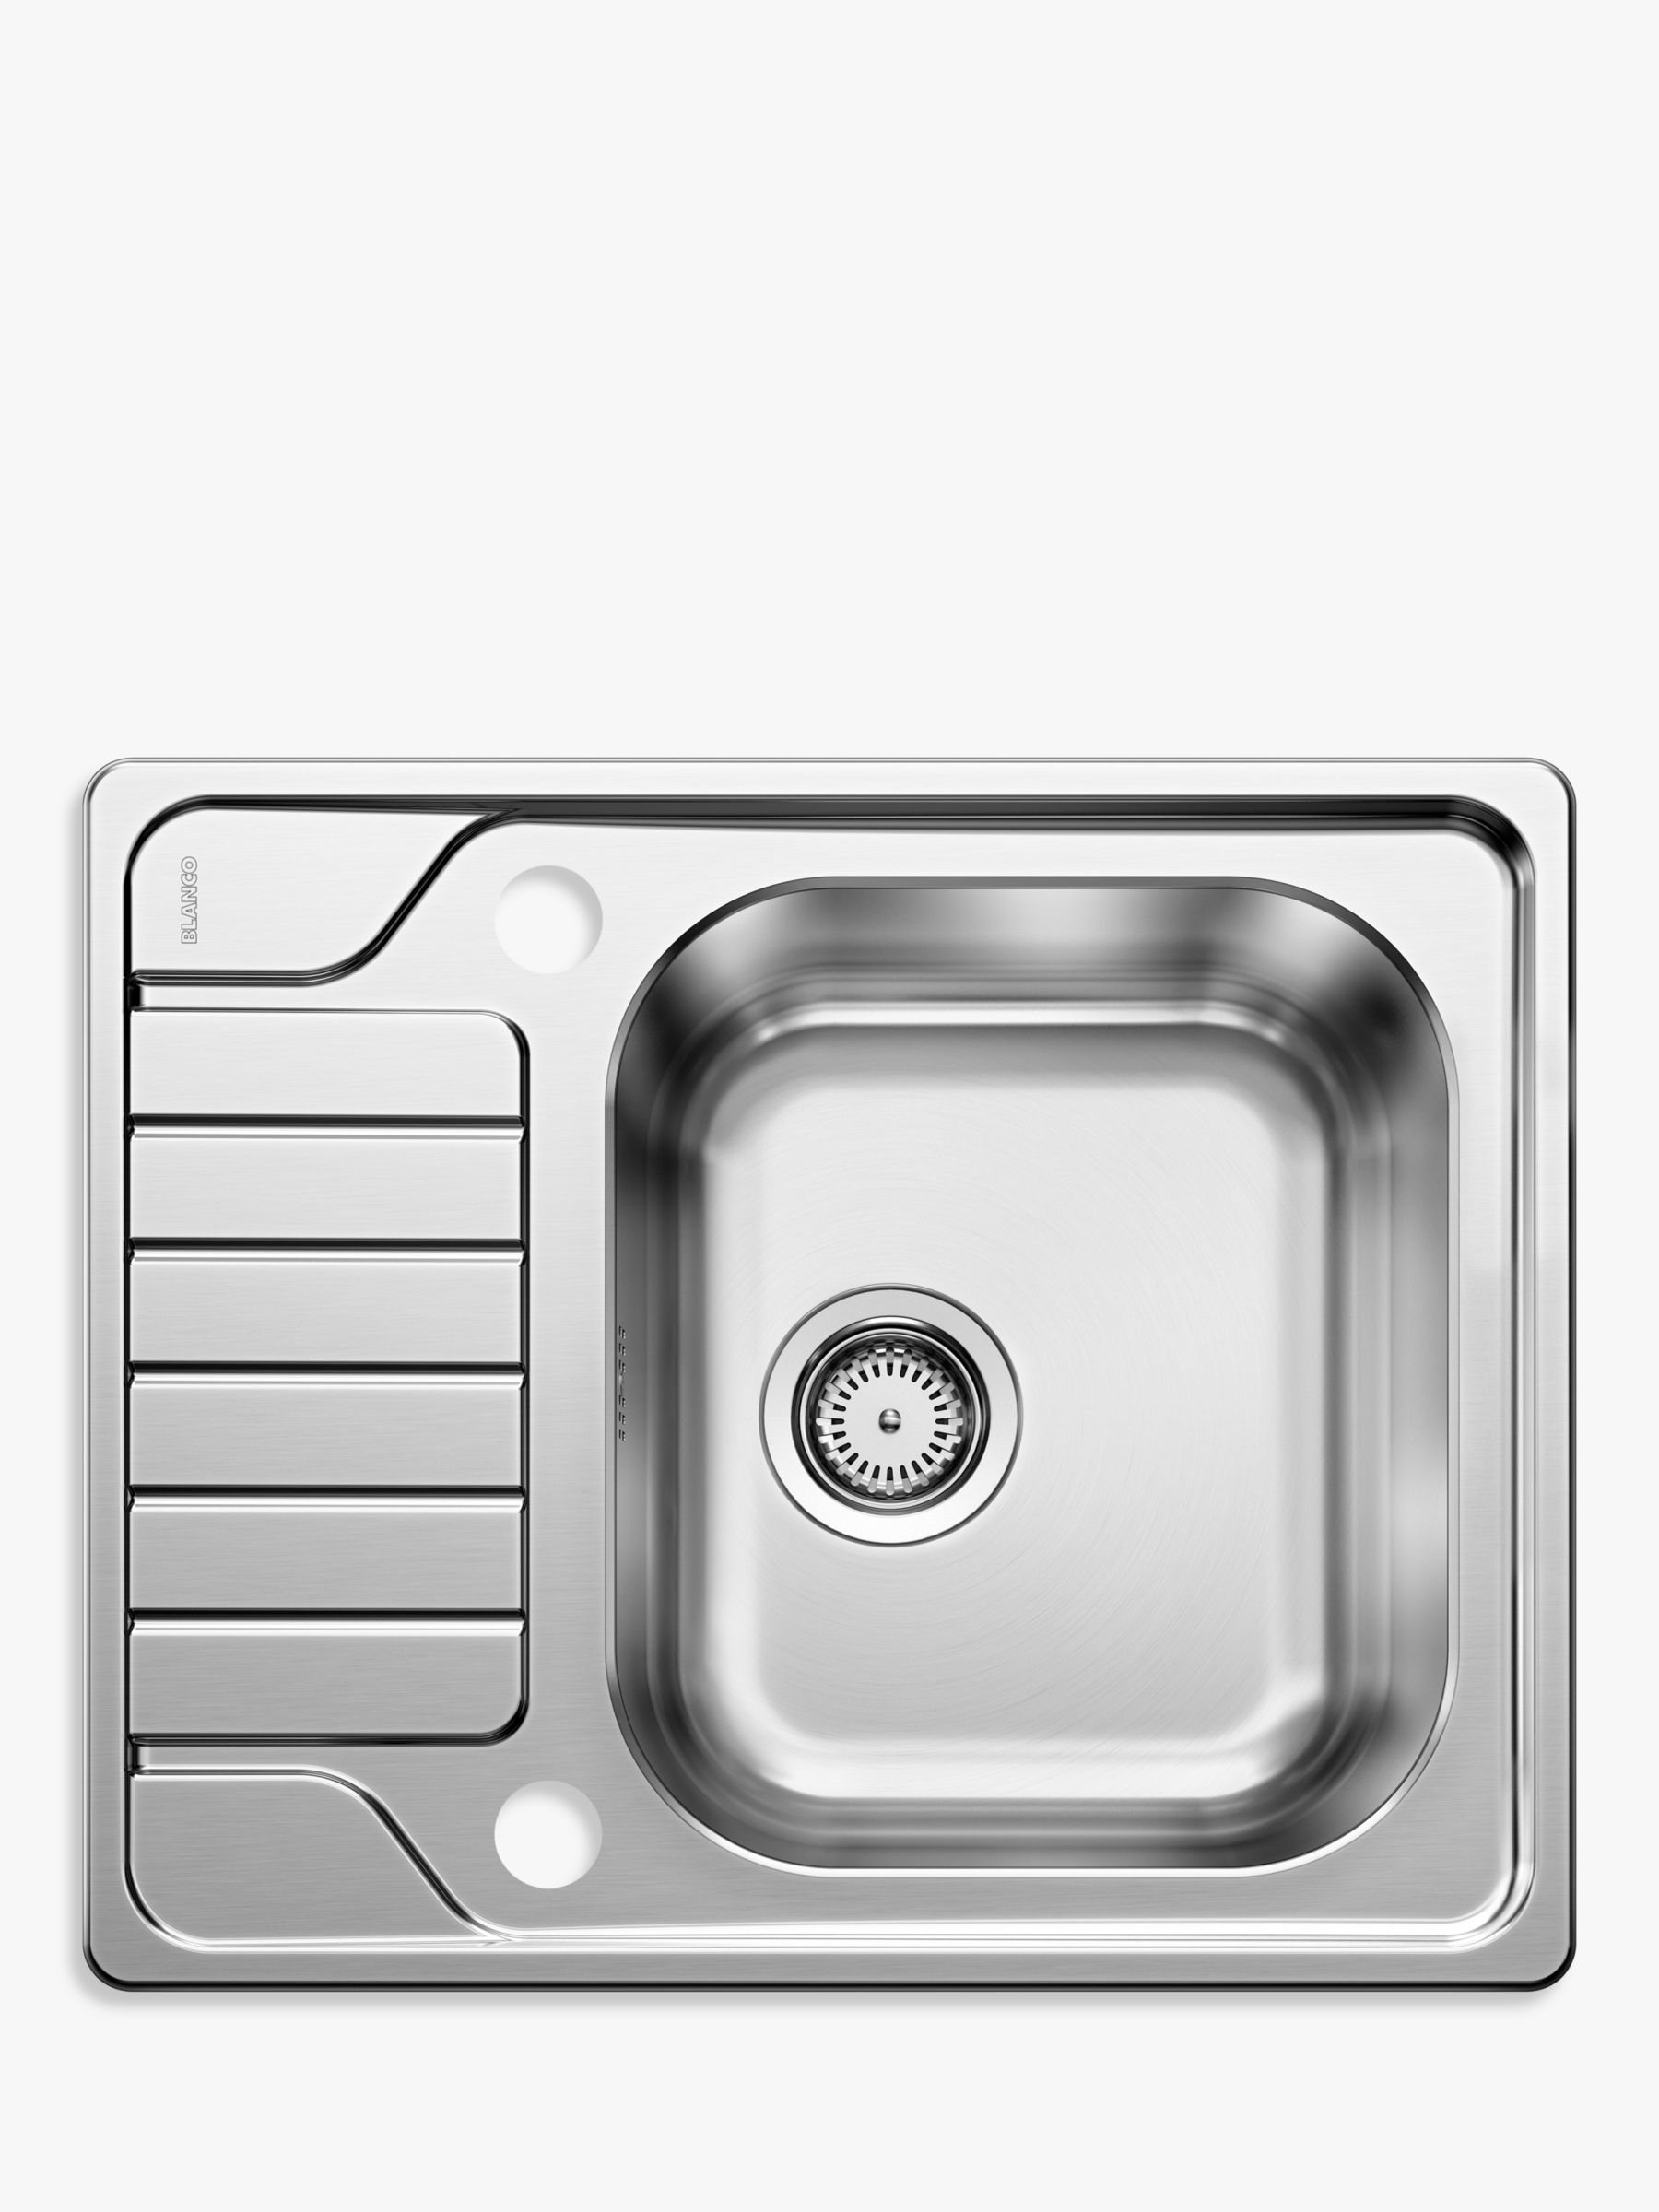 Blanco Dinas 45s Single Bowl Inset Kitchen Sink Stainless Steel